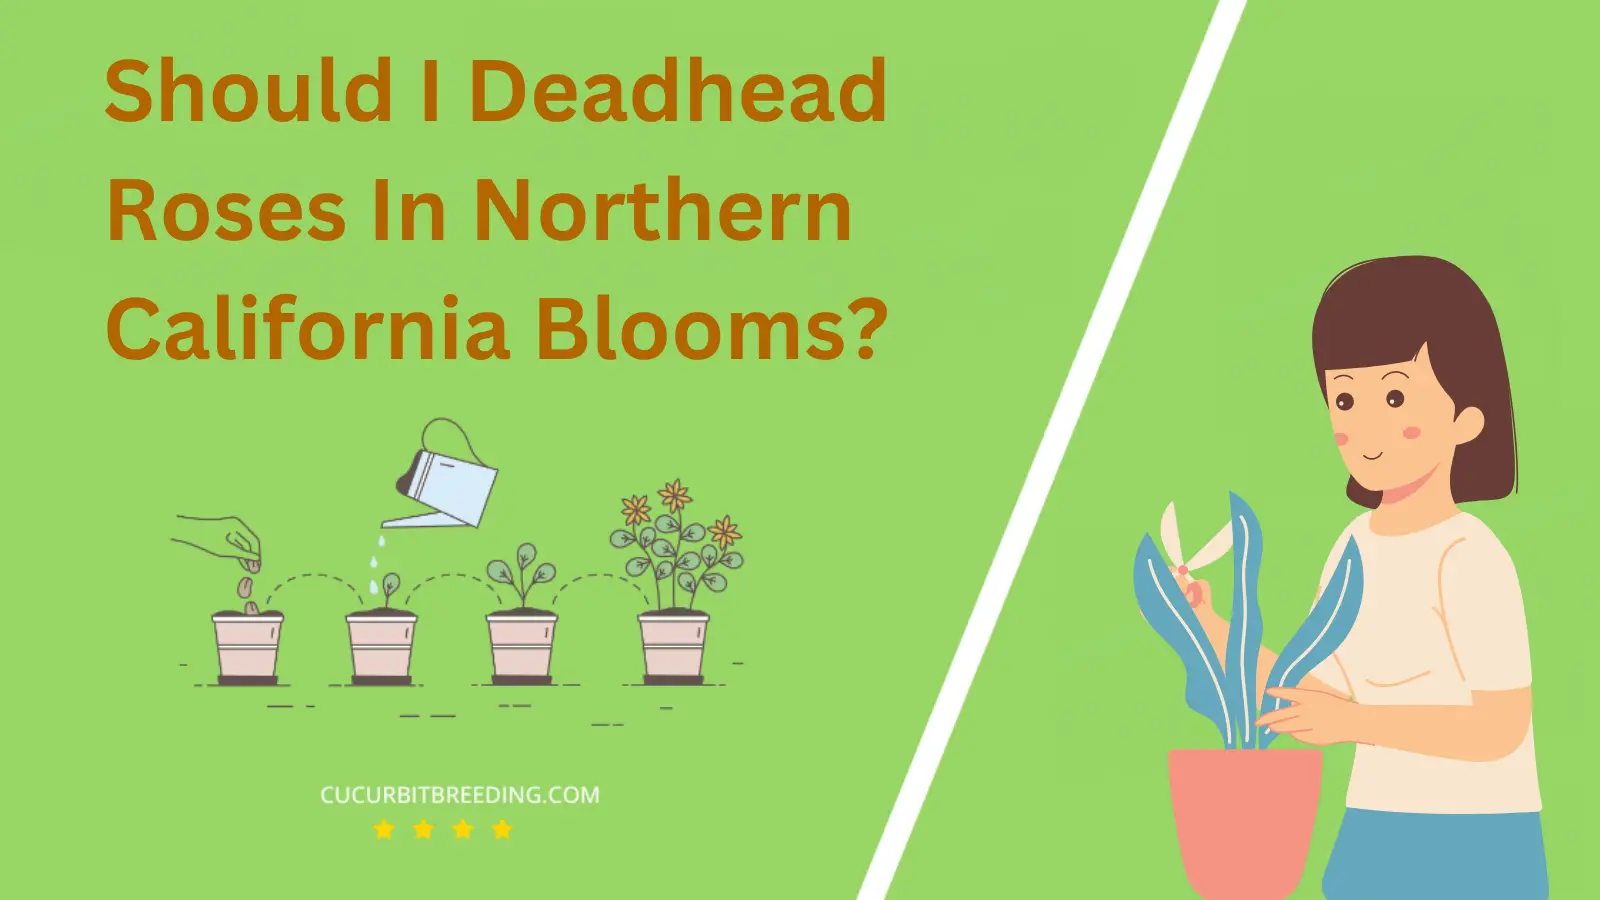 Should I Deadhead Roses In Northern California Blooms?